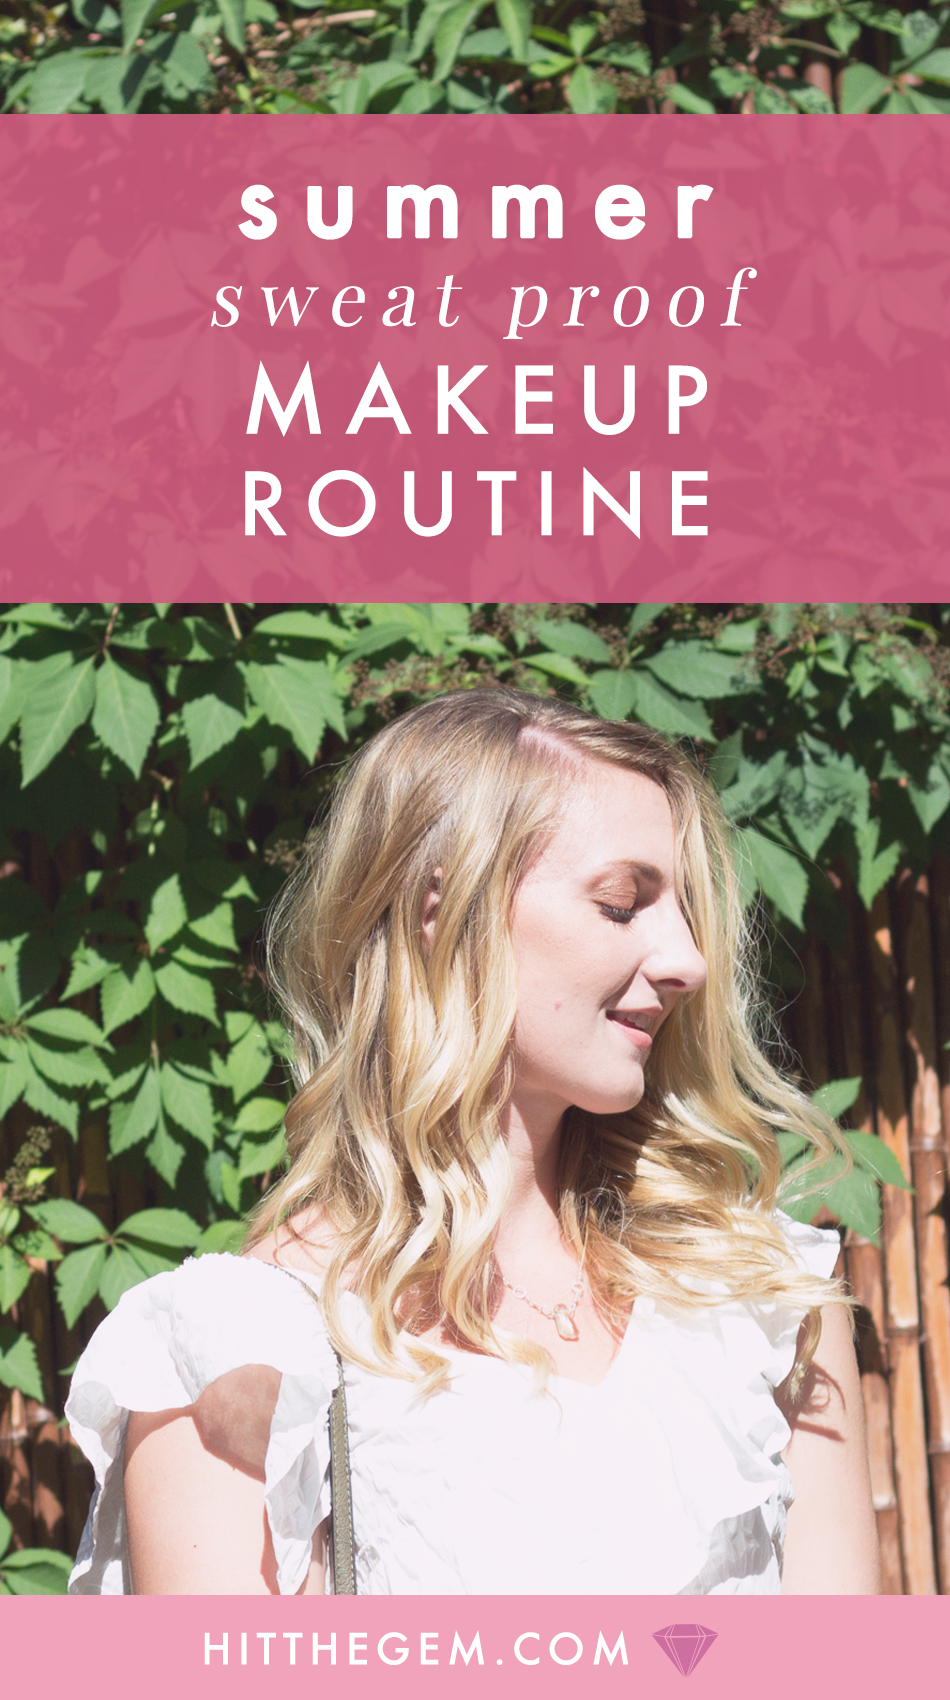 The thought of summer is fun and exciting, until you realize your makeup is going to sweat off your face. Find out what my sweat proof makeup routine is!